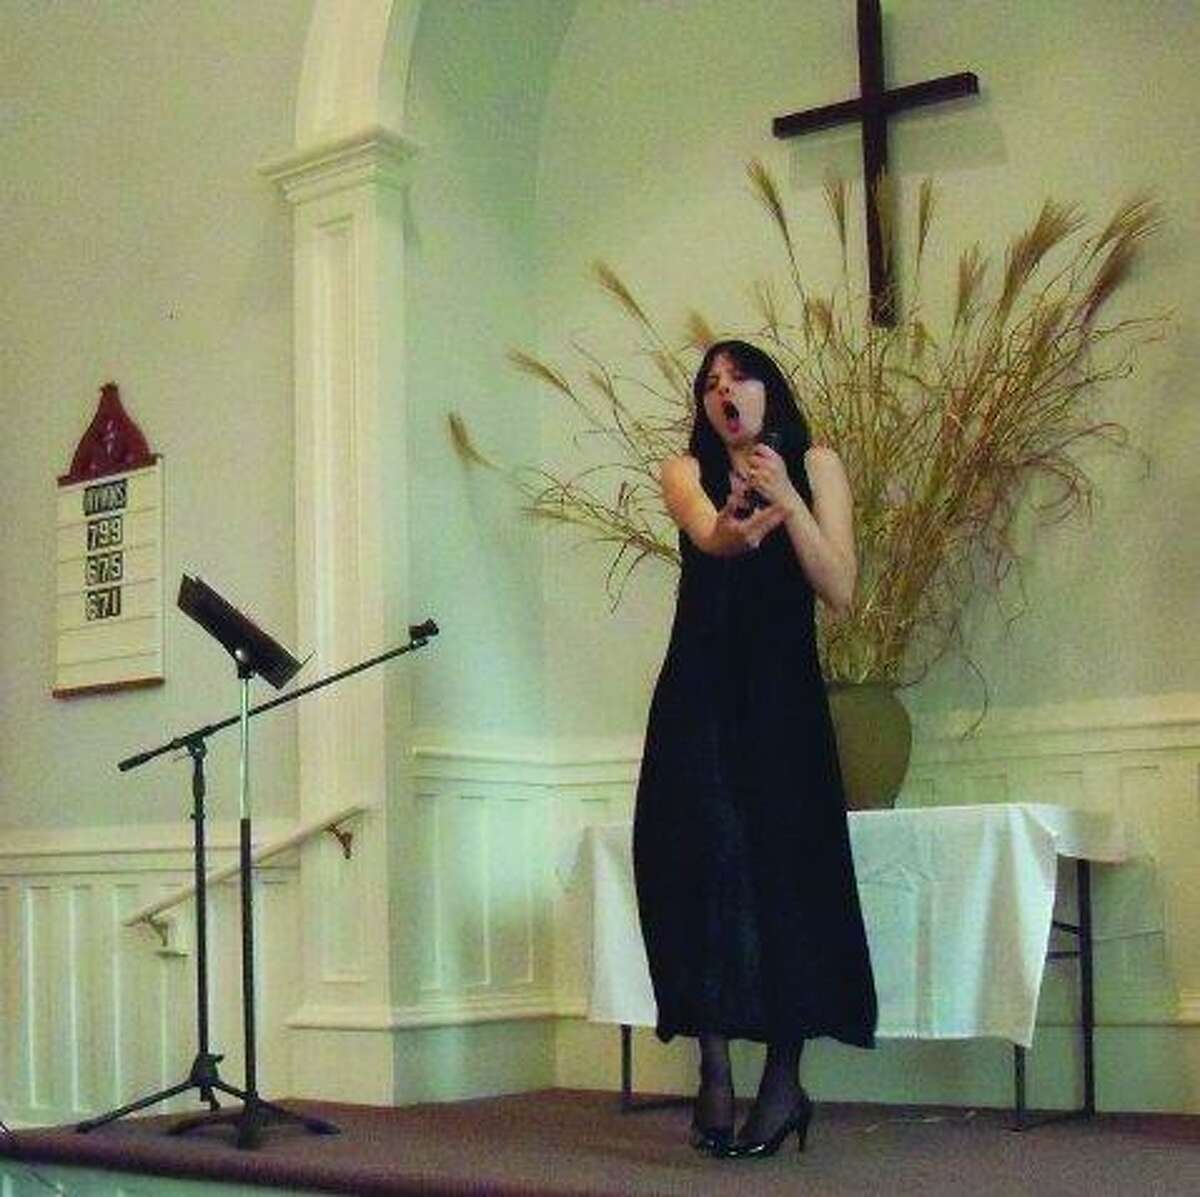 JASON SIEDZIK/ Register Citizen Heather Blauvelt, a Torrington native, sings "Get Me To the Church On Time" during her solo performance at Torrington's First Congregational Church, "A Touch of Class - Music for the Soul". The song was one of three from My Fair Lady, and the show -- which featured duets with Blauvelt's 7-year-old daughter, Angel, and Blauvelt's grandmother, Diane Kirsch, blended secular and spiritual songs.